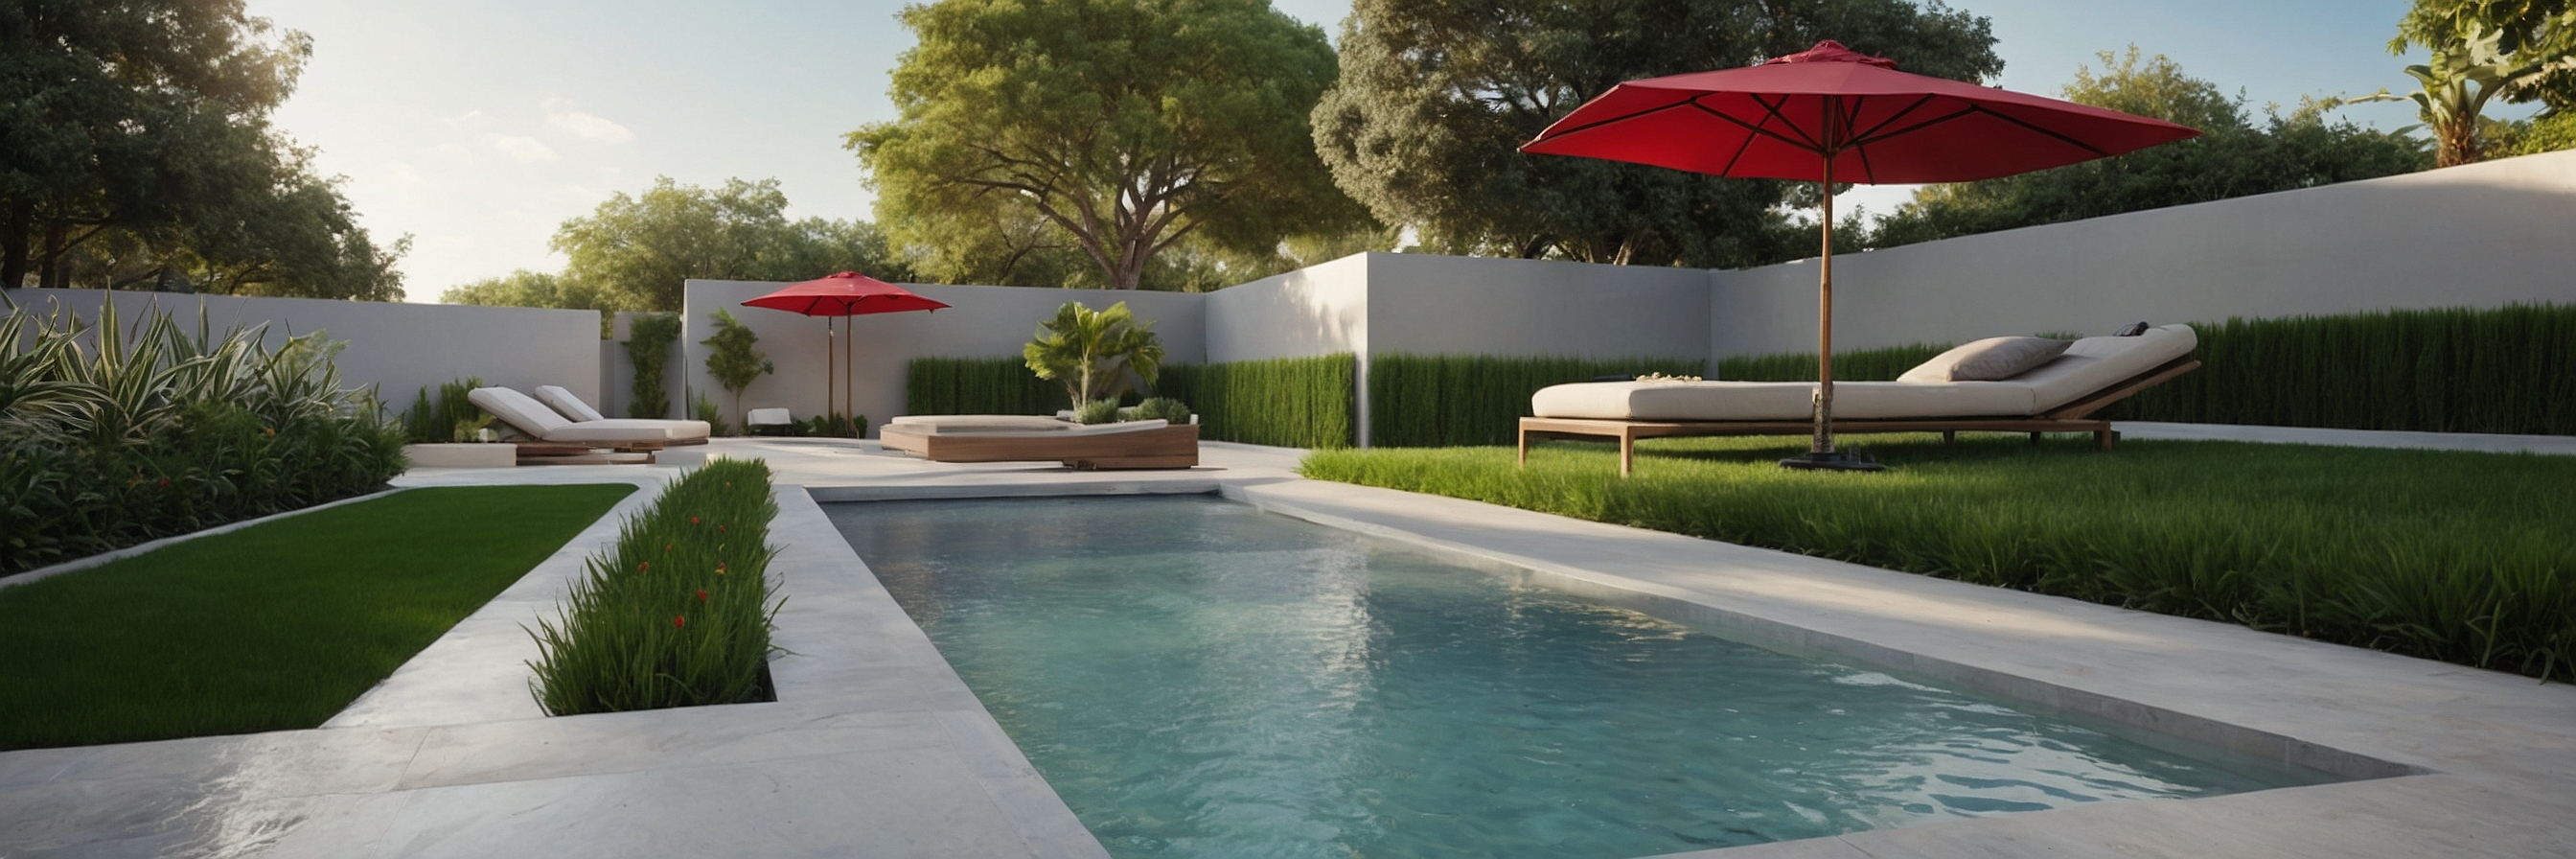 rectangular swimming pools with synthetic turf grass, red umbrella